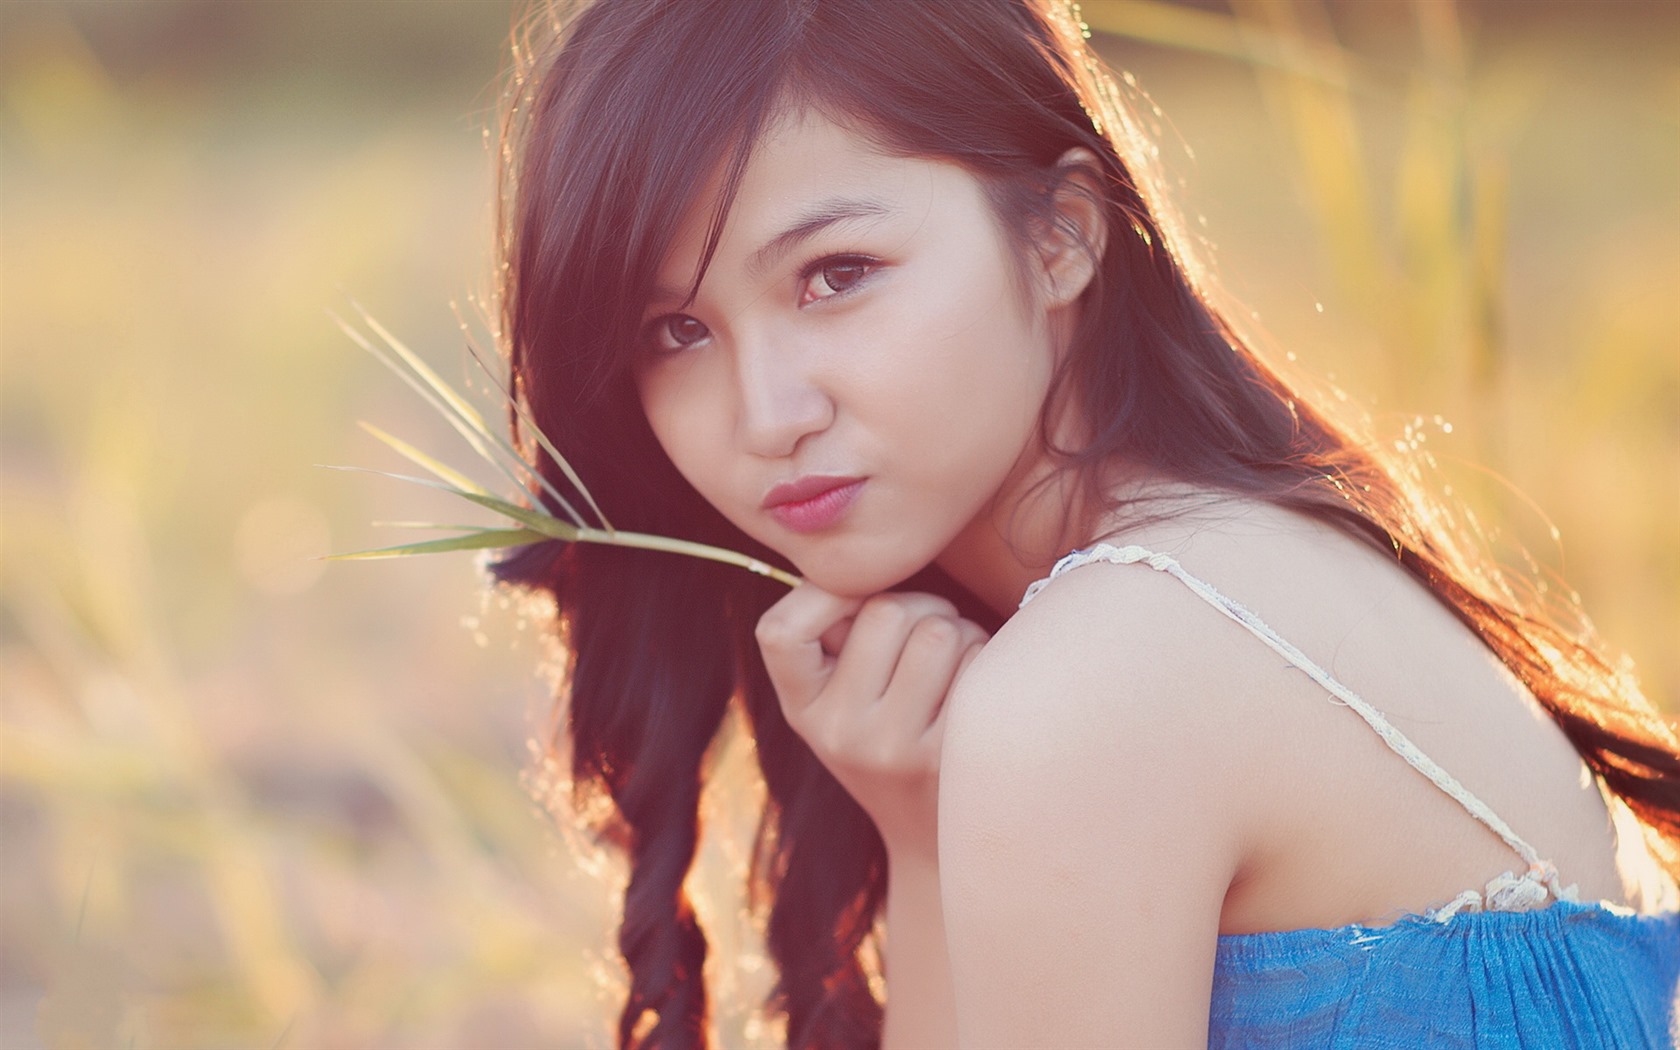 Pure and lovely young Asian girl HD wallpapers collection (5) #35 - 1680x1050